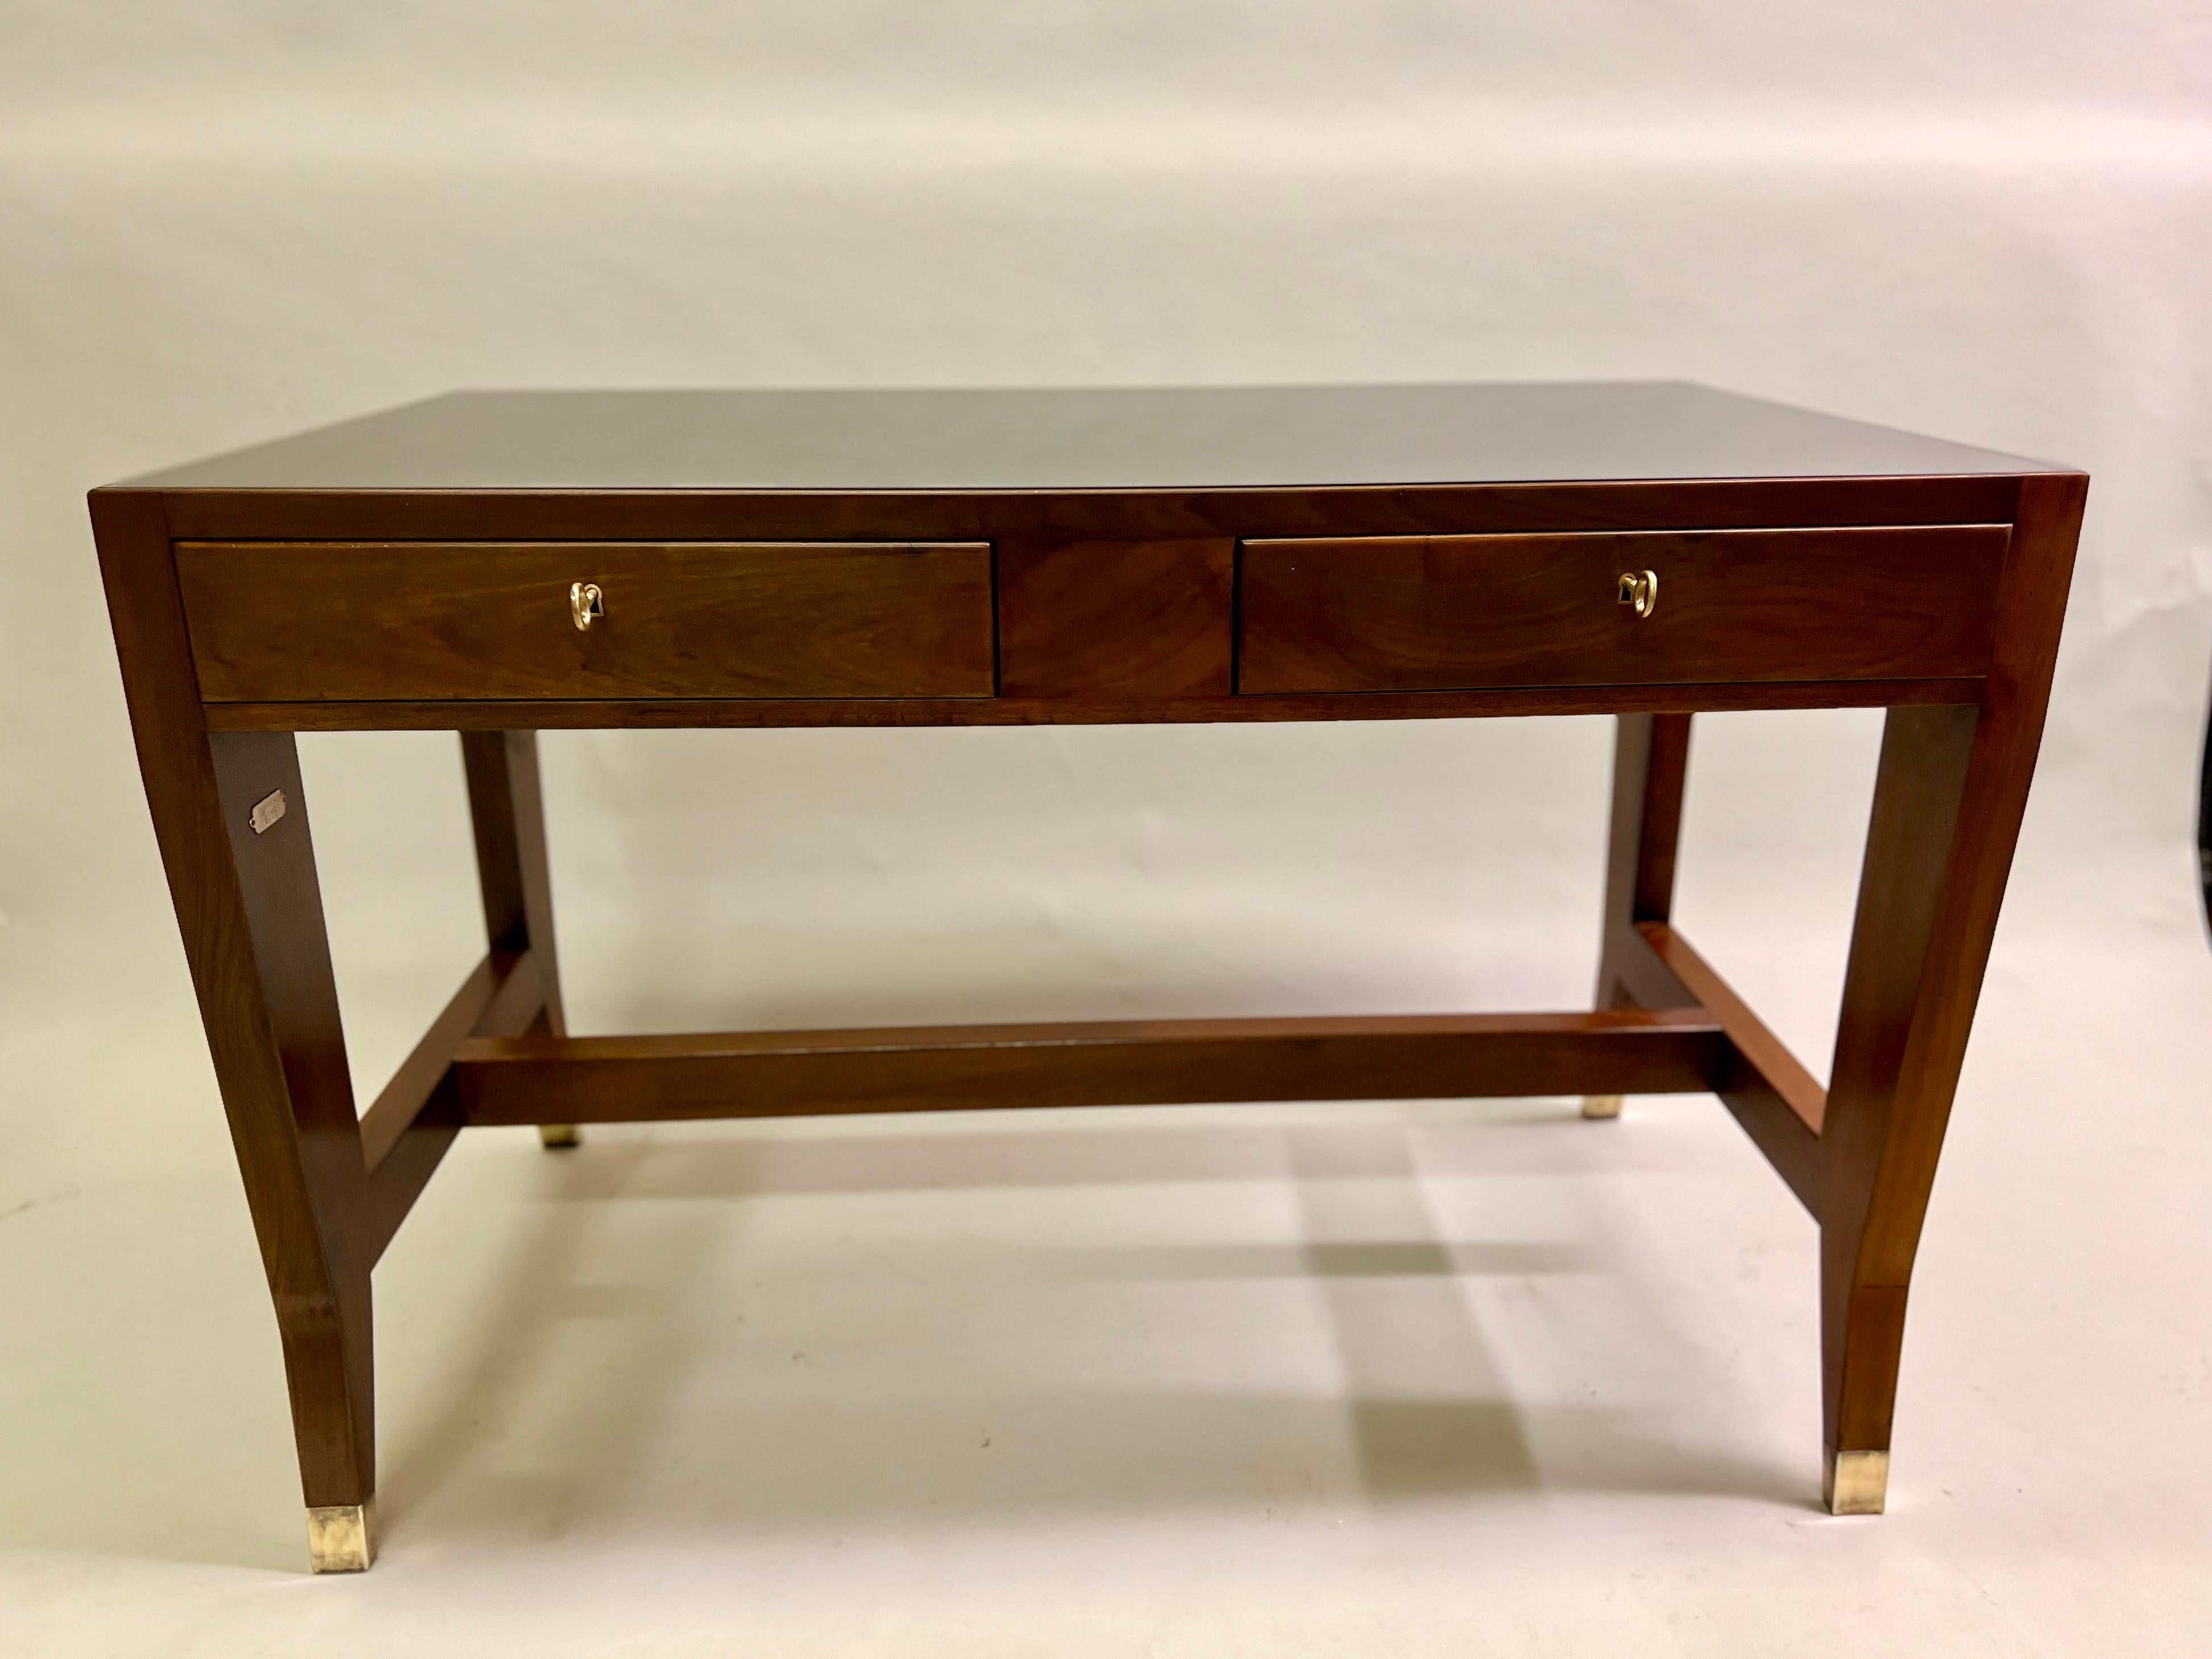 A Rare and Elegant Italian MId-Century Modern Neoclassical Desk / Writing Table by Gio Ponti in solid walnut with an inset top of black onyx glass and brass details. Ponti's design acumen is powerful and sublime in this piece; the desk is a